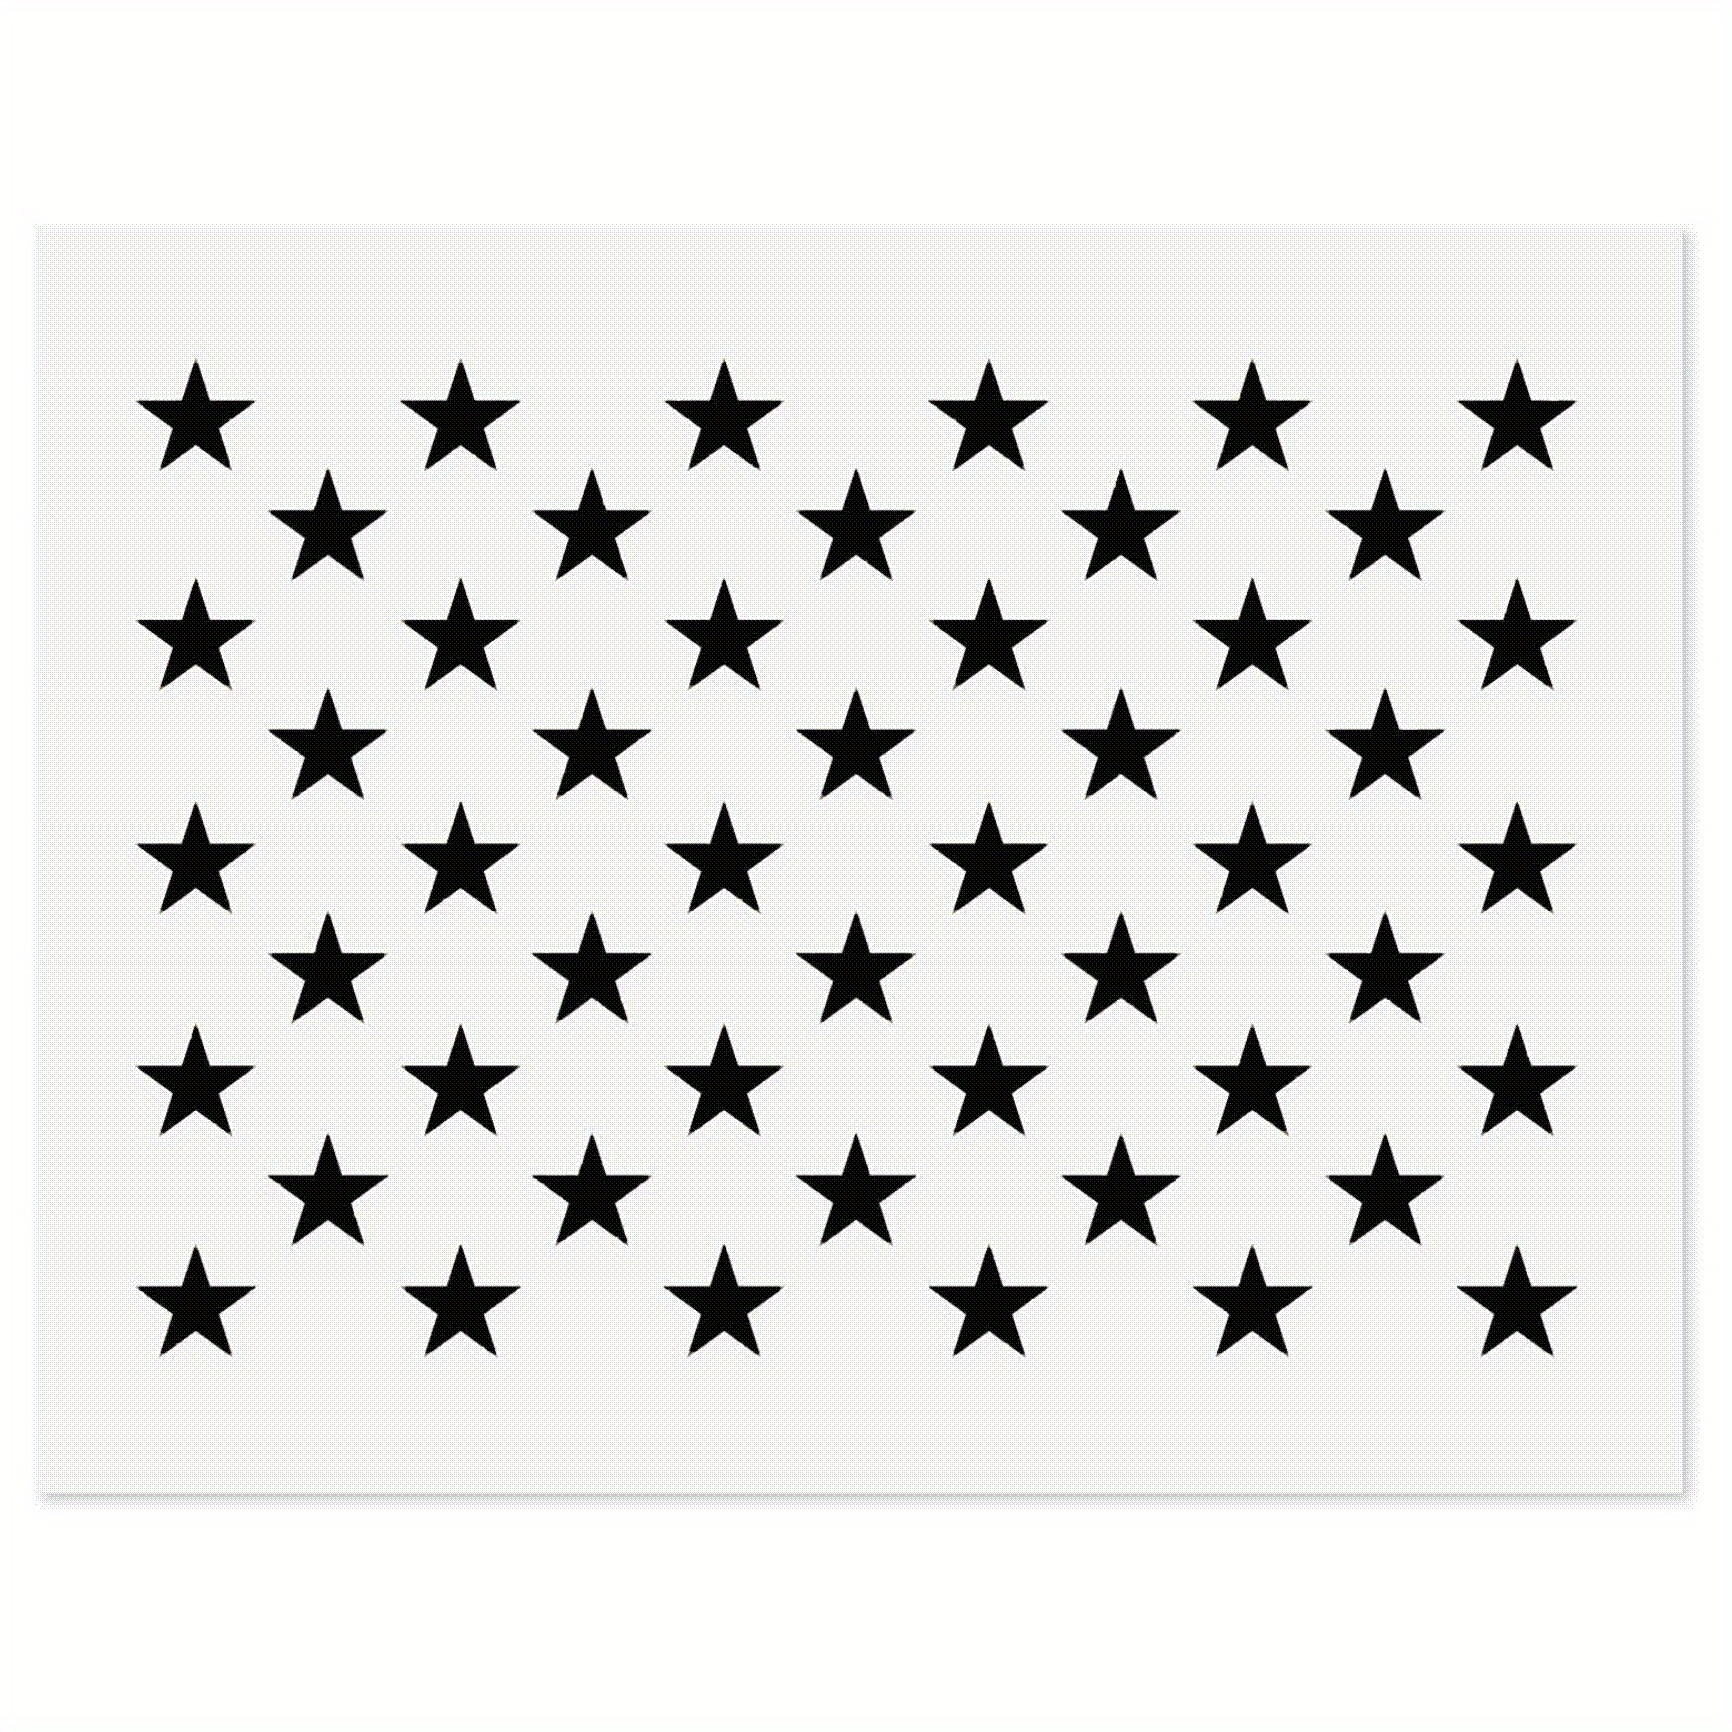 American Flag 50 Star Stencil Template for Painting on Wood, Fabric, Paper, Airbrush, Glass and Wall Art, Reusable Starfield Stencil 6 Pack(3 Sizes)